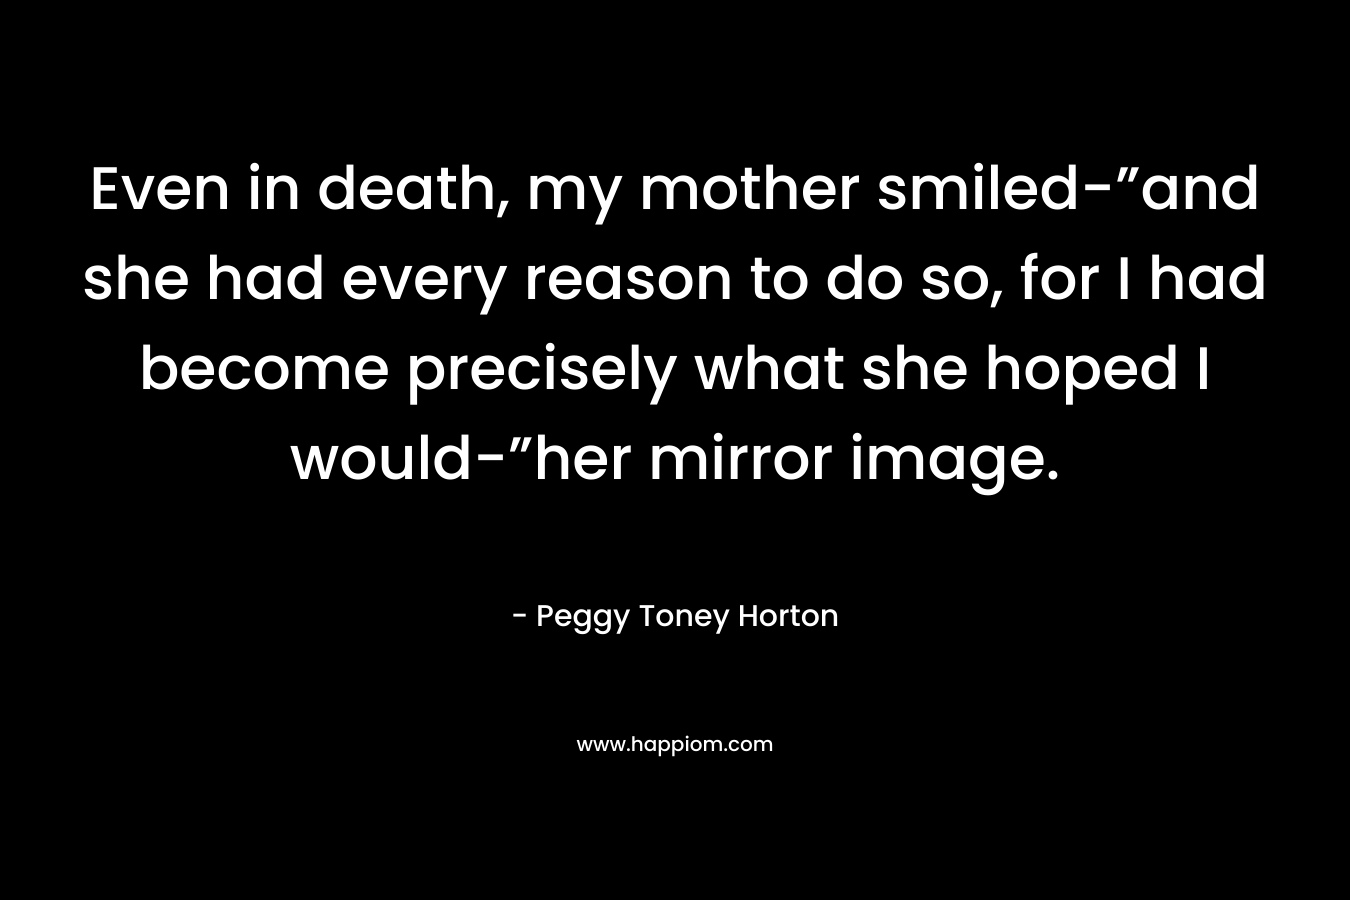 Even in death, my mother smiled-”and she had every reason to do so, for I had become precisely what she hoped I would-”her mirror image.